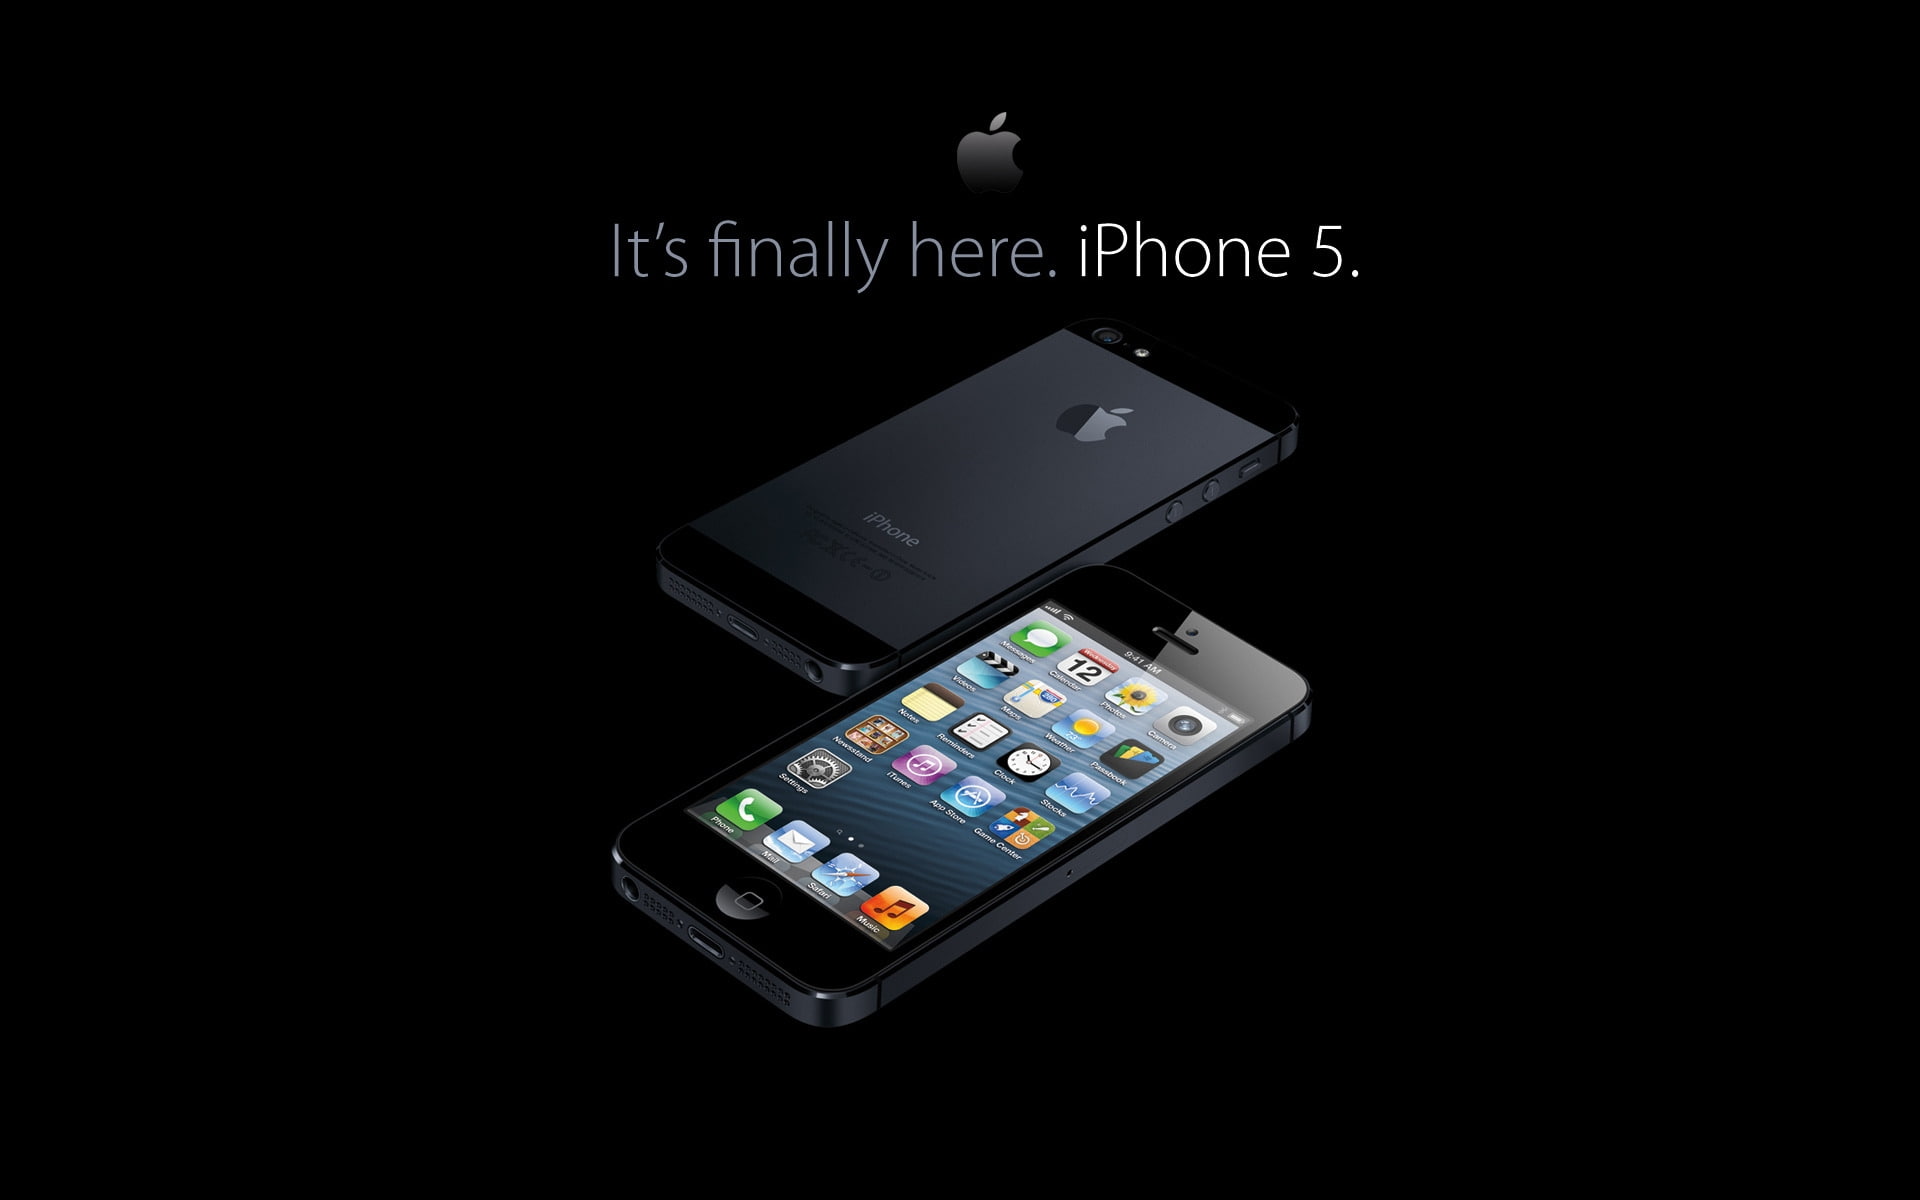 New iPhone 5 Handset Black, device, cell phone, iphone5